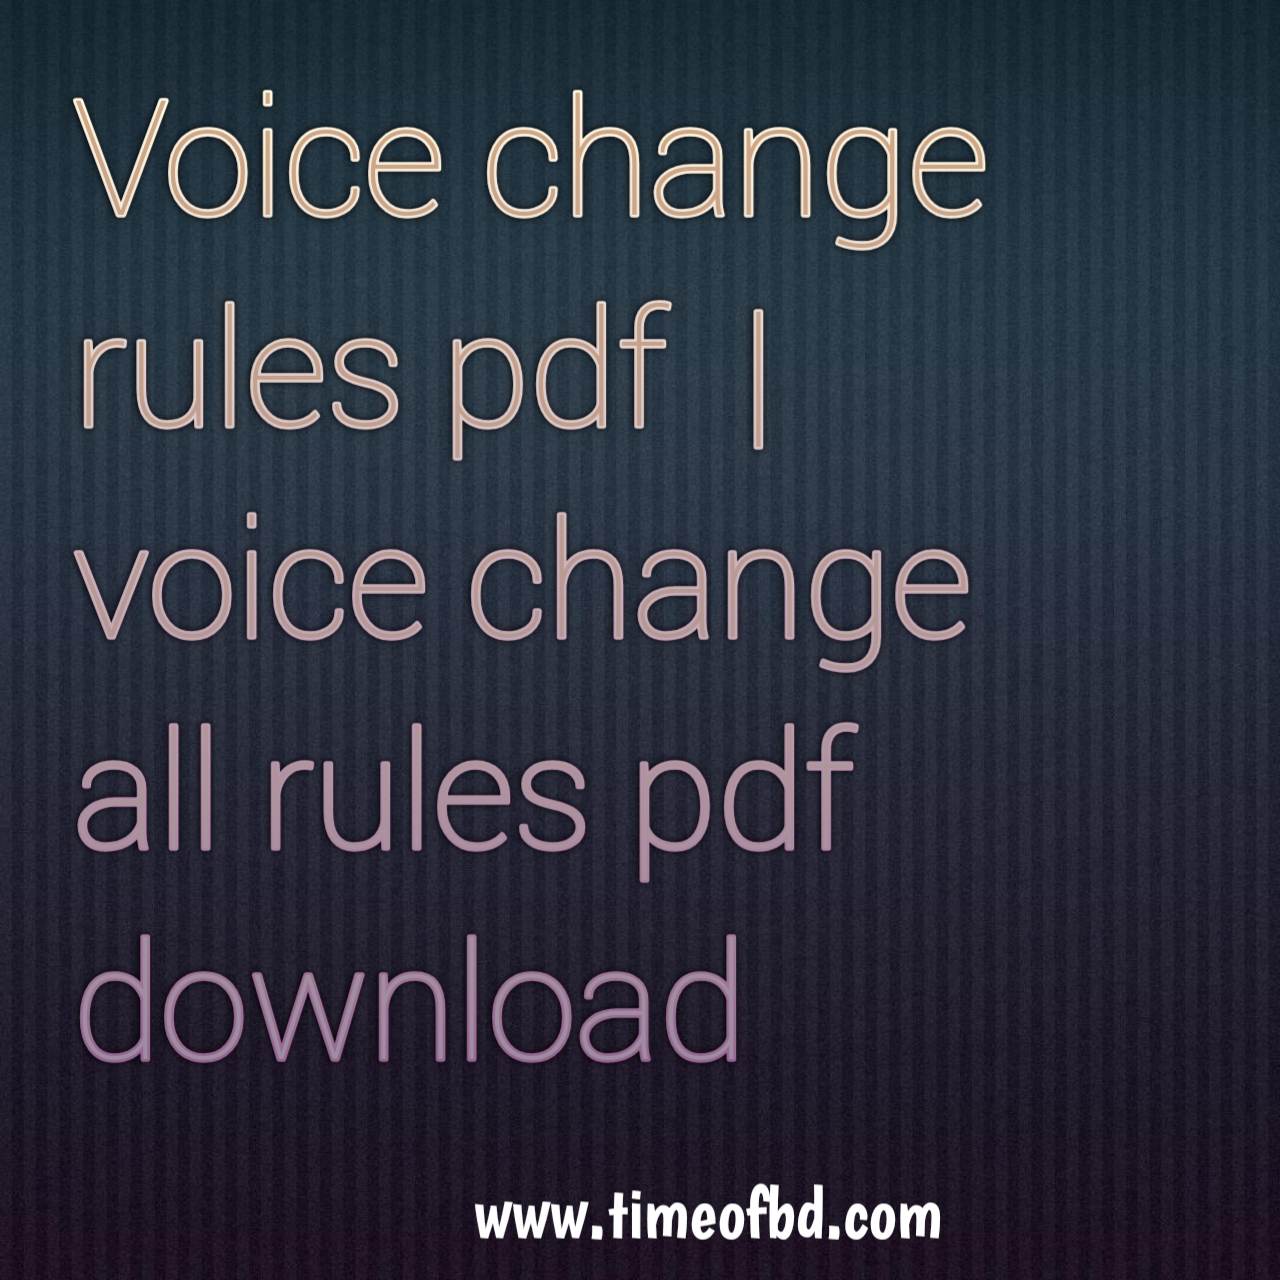 Voice change rules pdf, voice change all rules pdf, English grammar voice change pdf rules, voice change rules pdf download , voice change rules with examples pdf